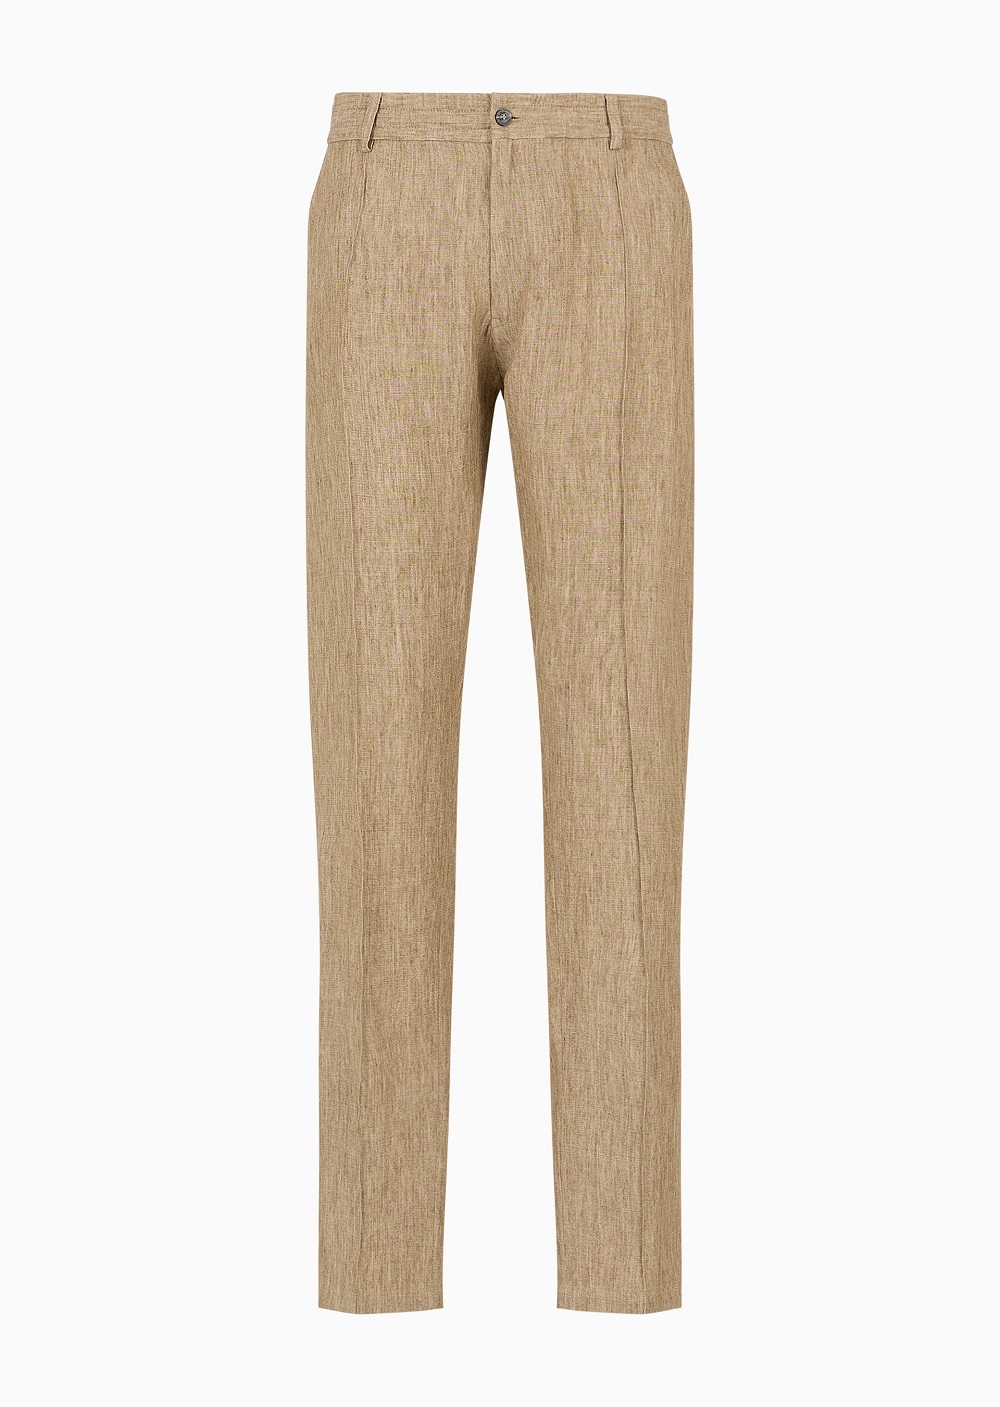 Emporio Armani Crêpe-effect faded linen trousers with ribbing